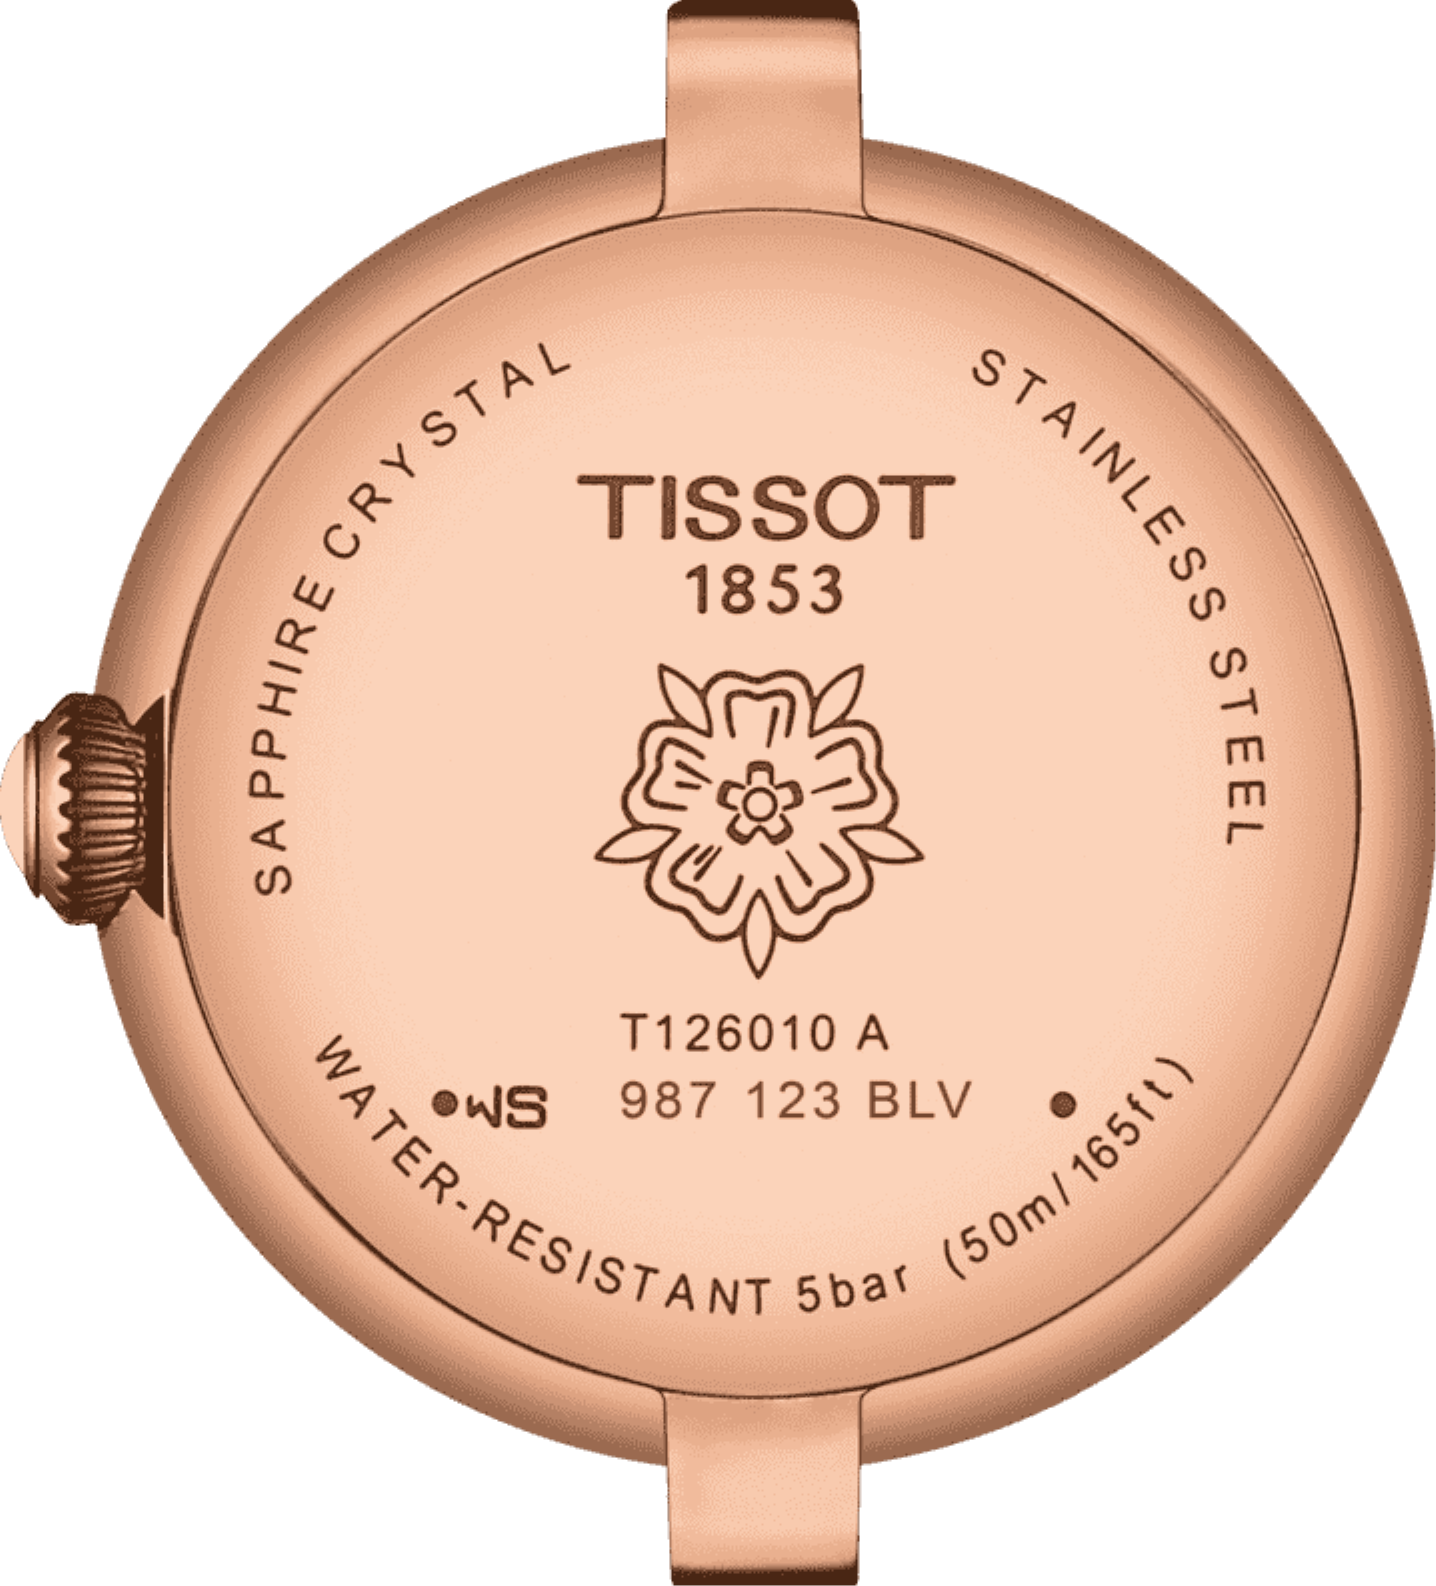 Tissot Bellissima Small Lady 26mm Rose Gold Watch For Women - T126.010.36.013.00